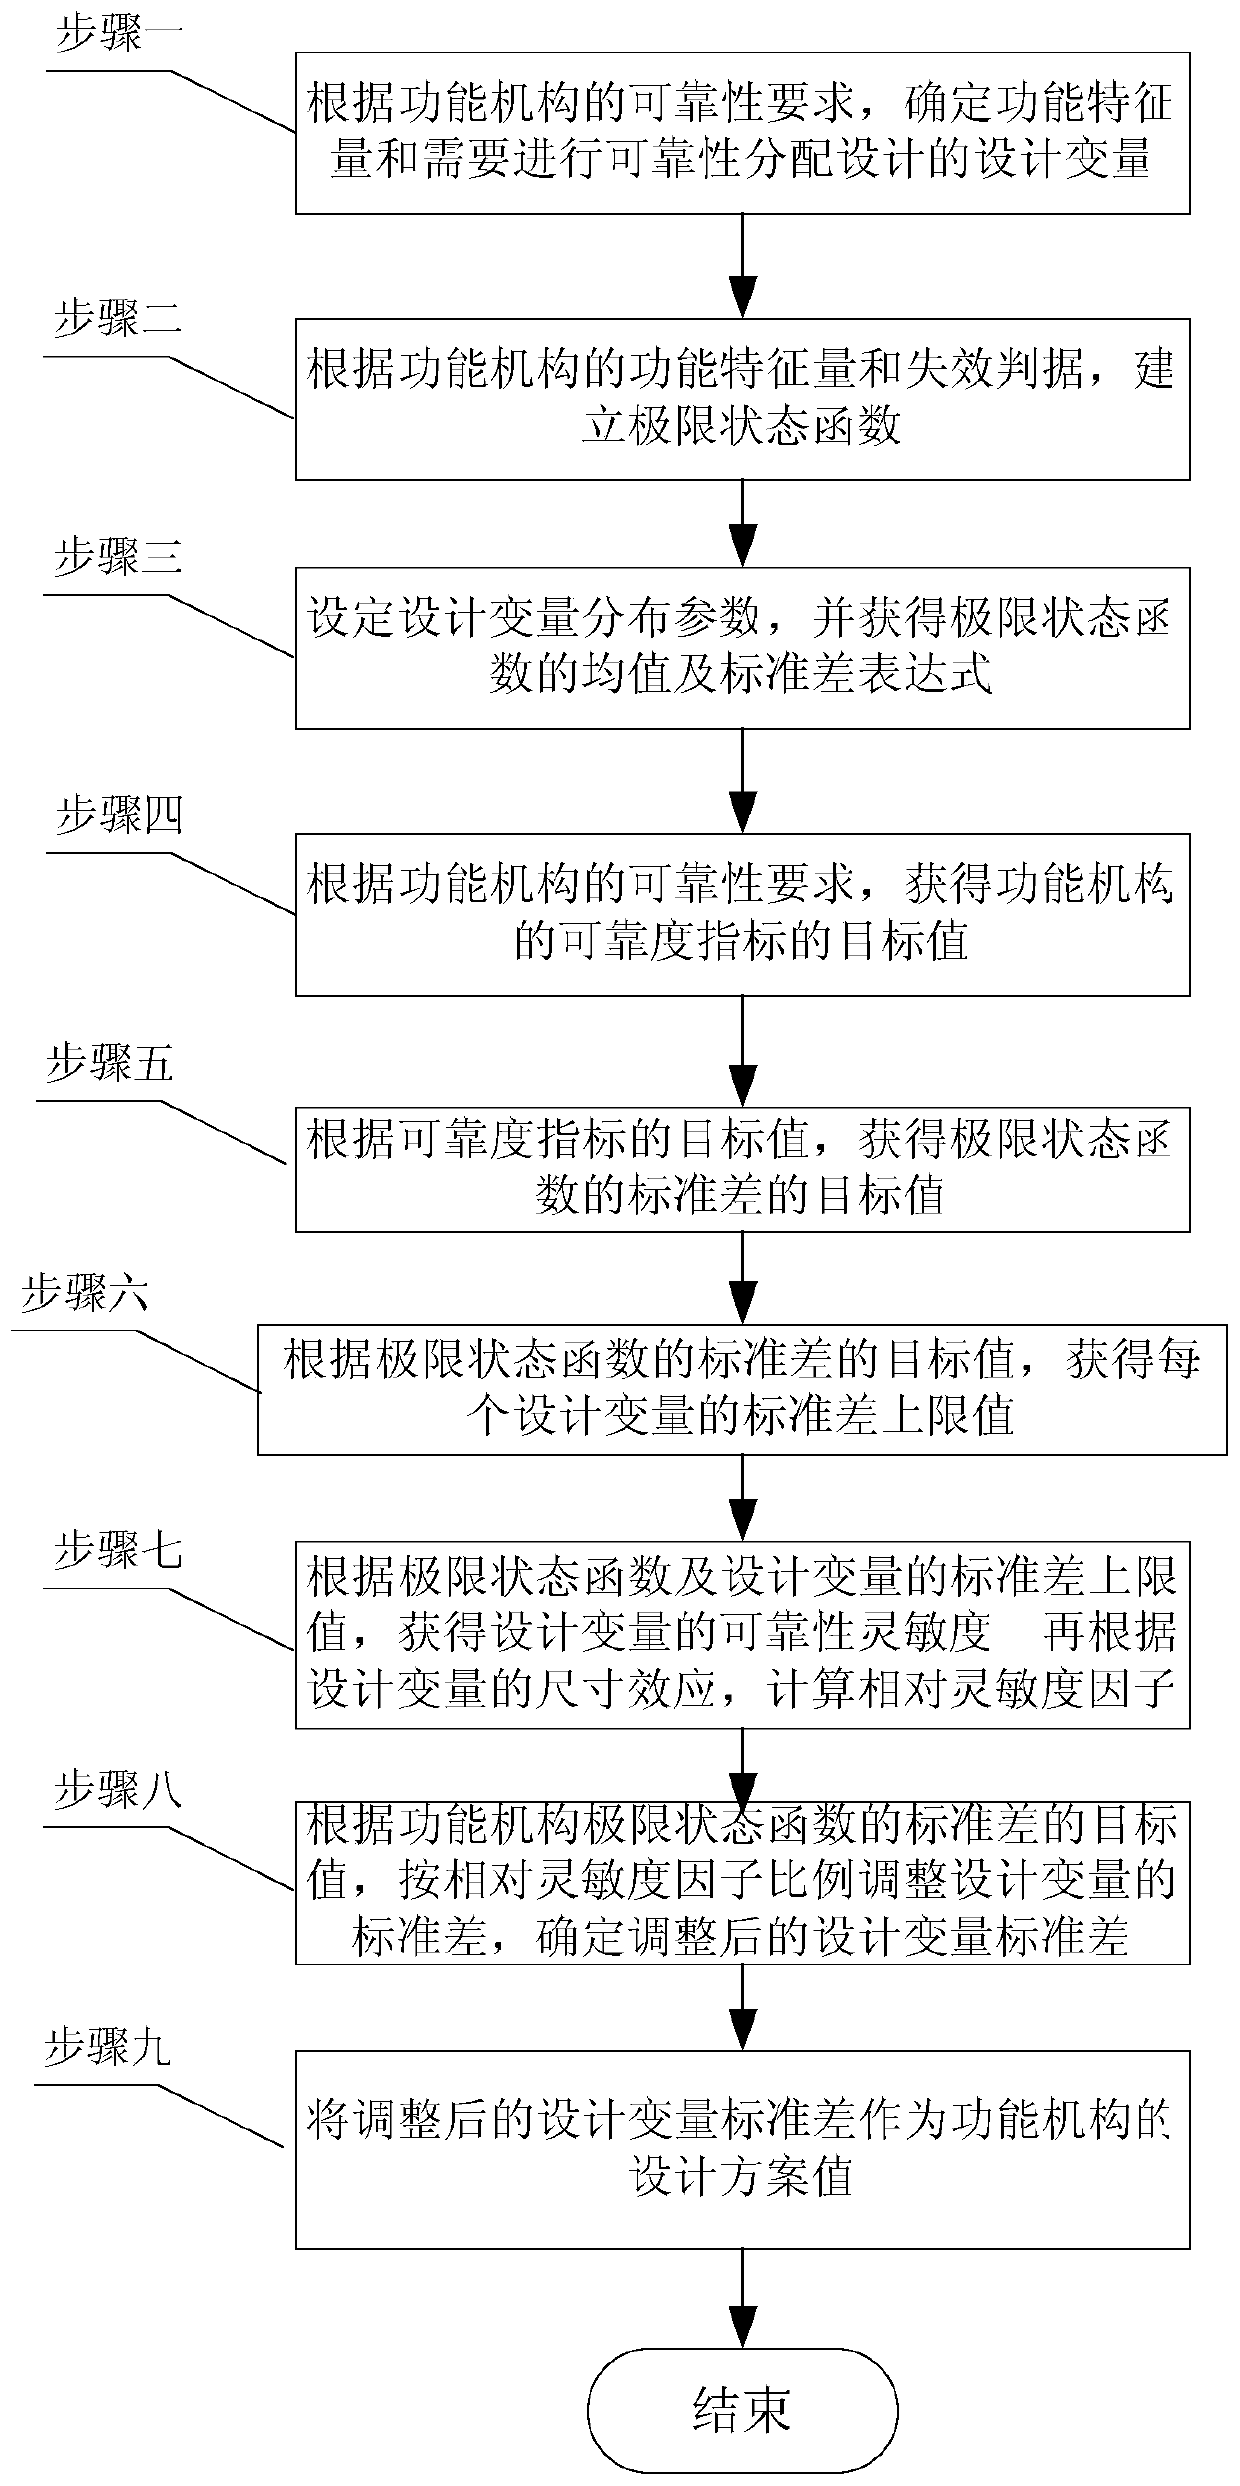 Reliability Assignment Design Method of Function Mechanism of Mechanical Products